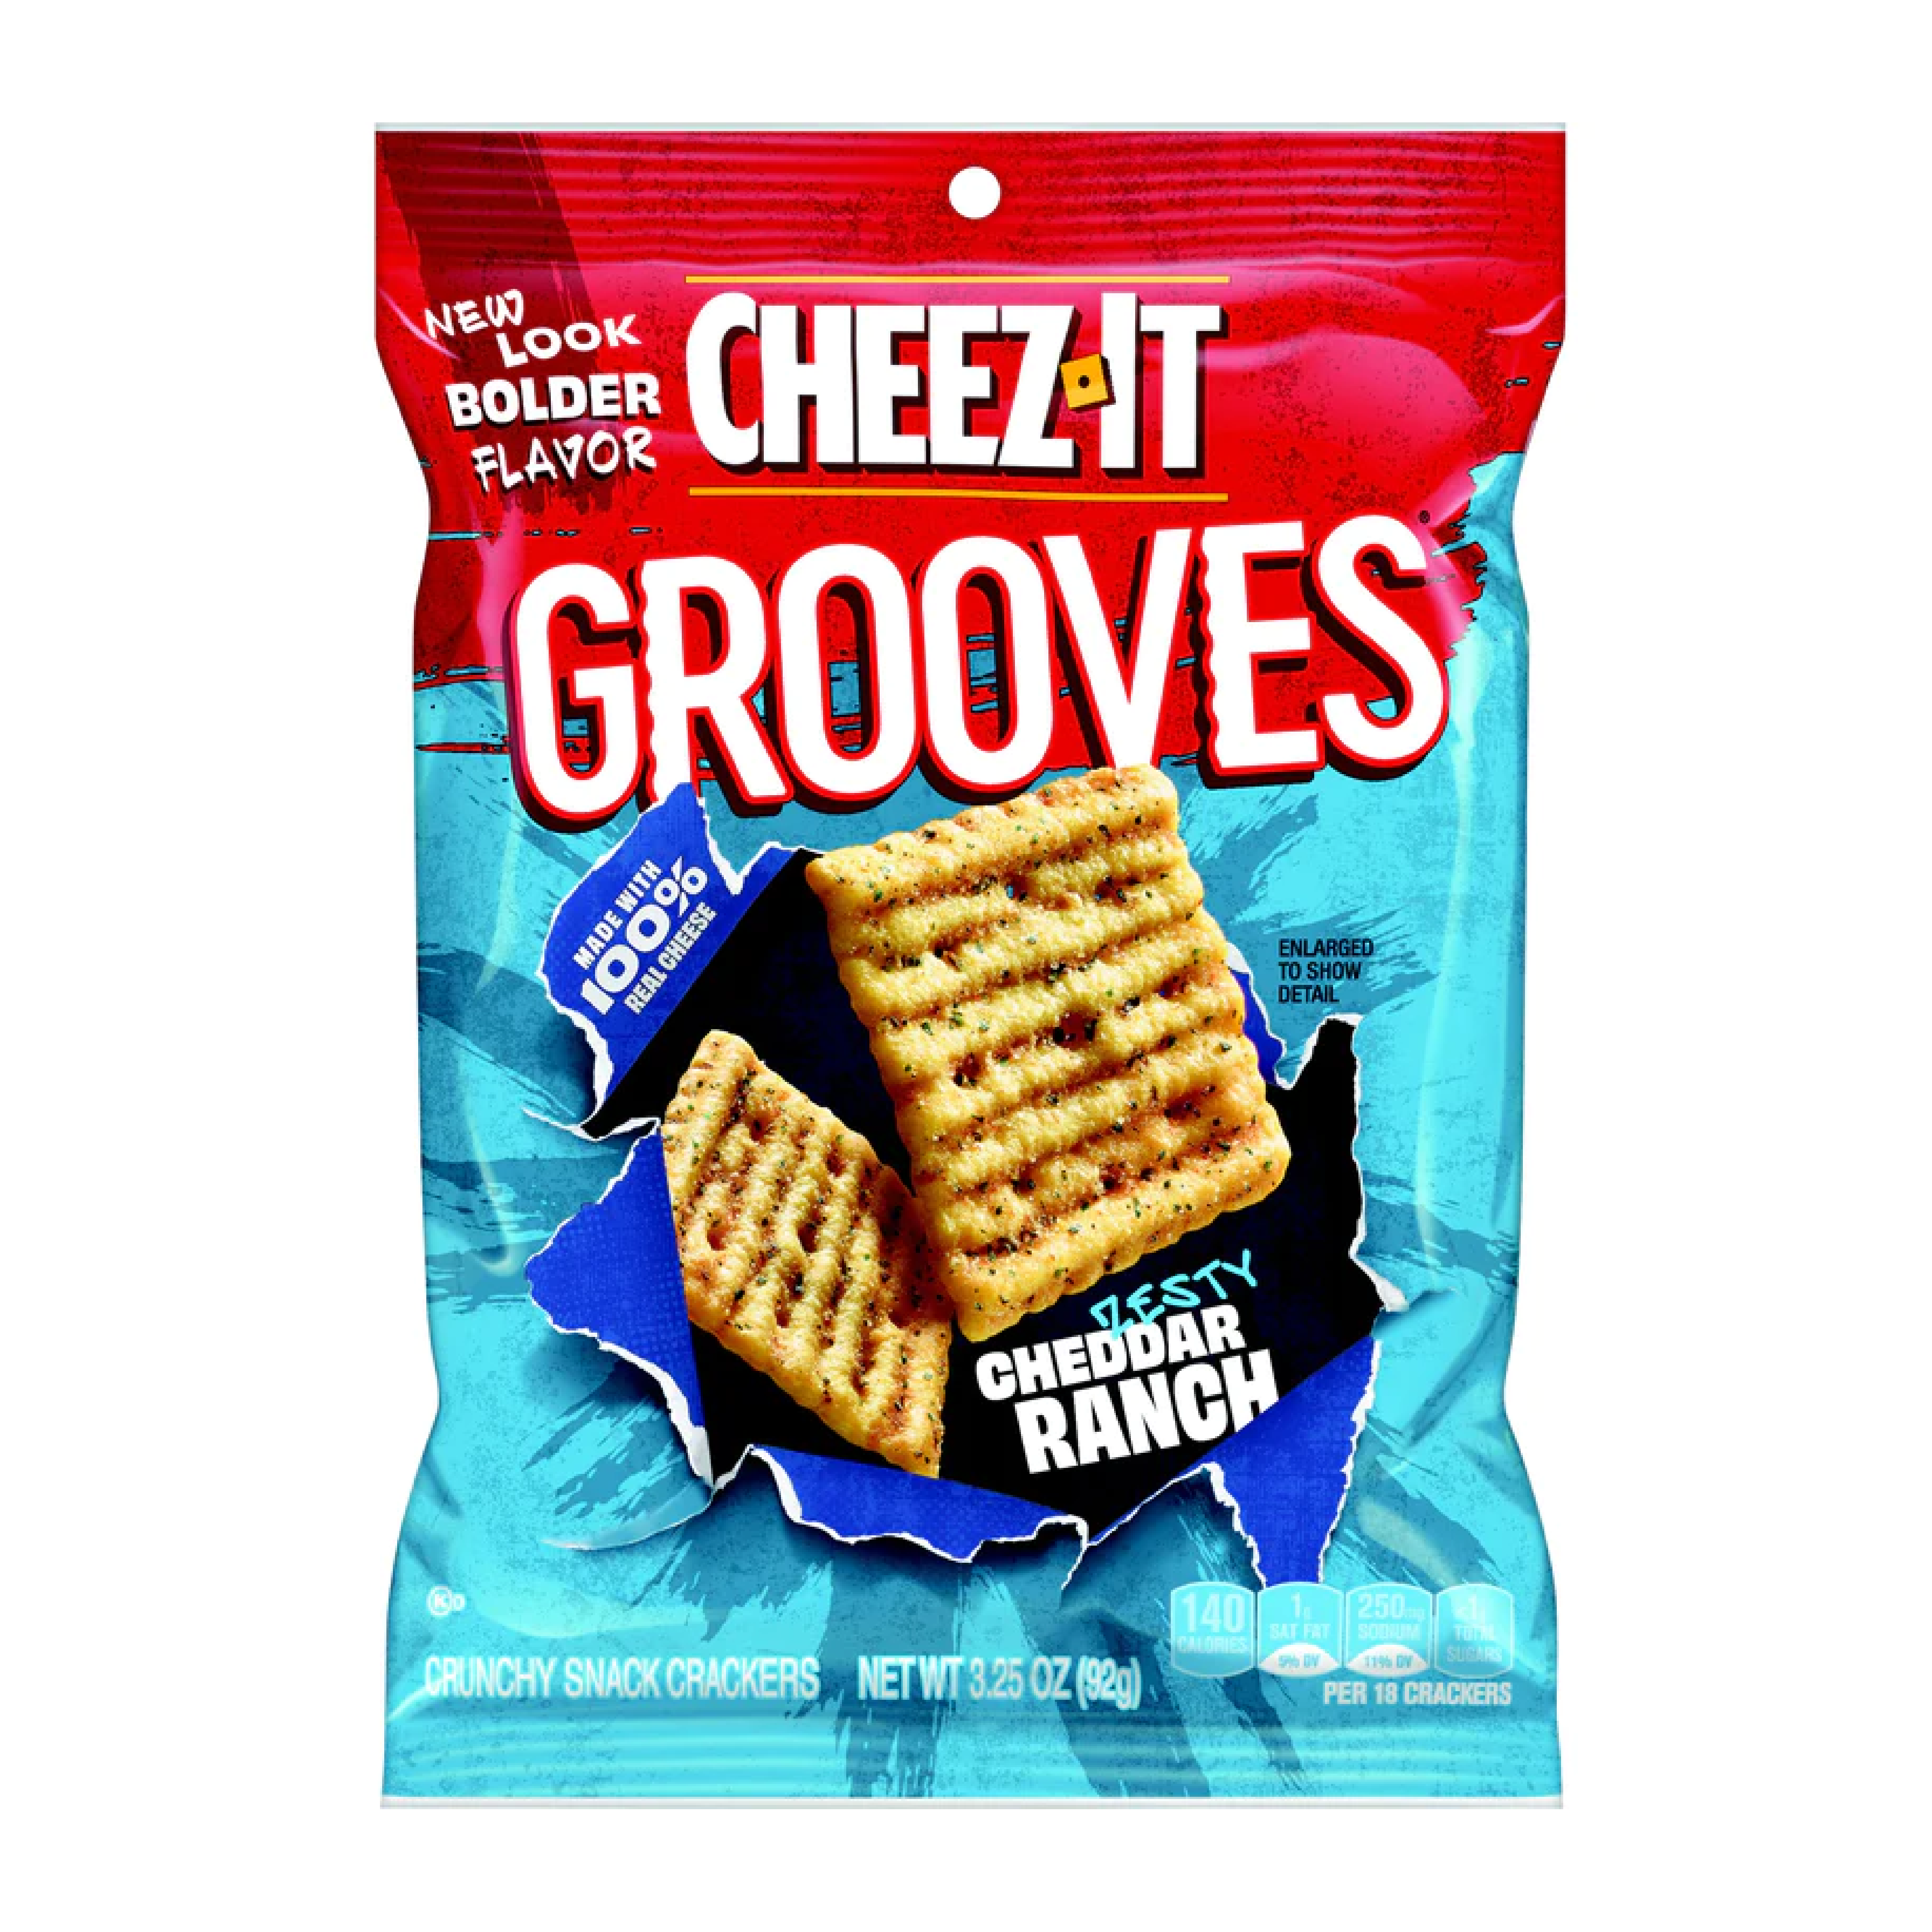 Cheez-It Grooves Zesty Cheddar Ranch Snack Crackers 3.25oz